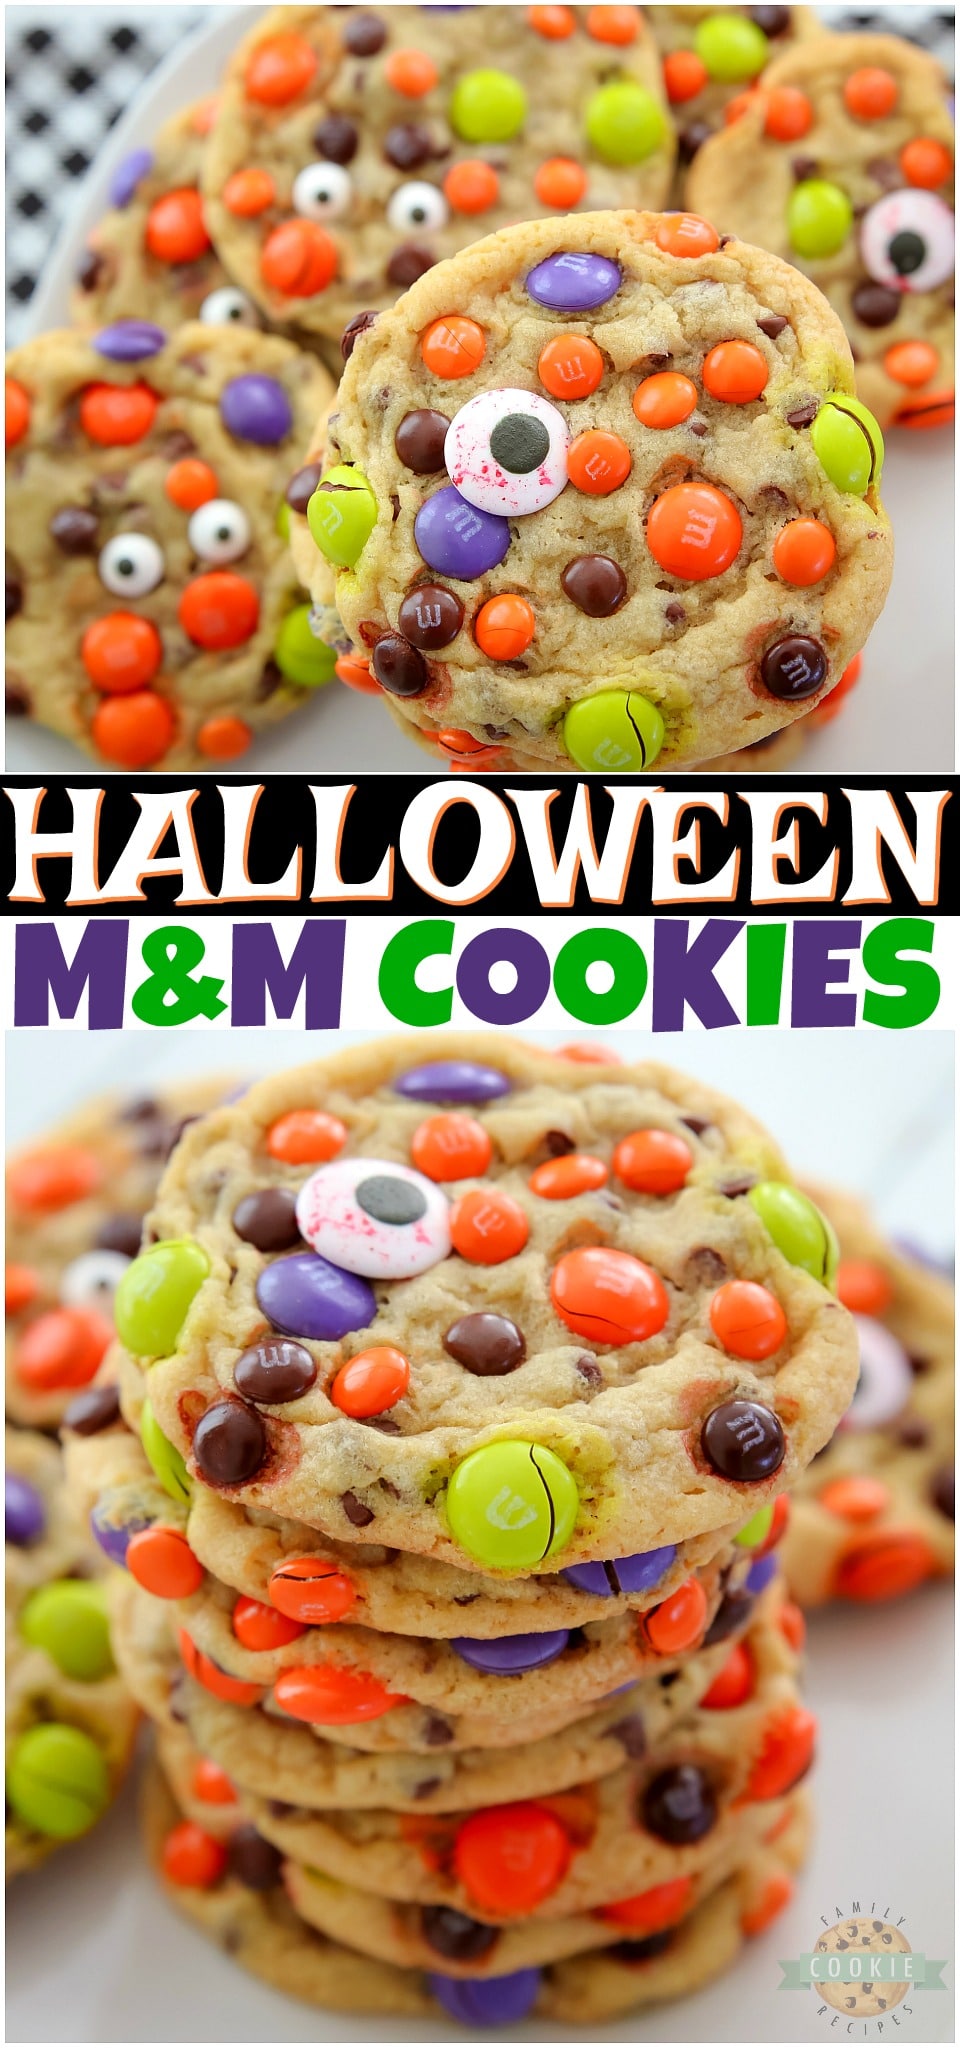 Perfect M&M HALLOWEEN Cookies made with butter, sugars, pudding mix & festive M&M’s candies! Fun & festive Halloween Cookie recipe with candy that everyone loves!